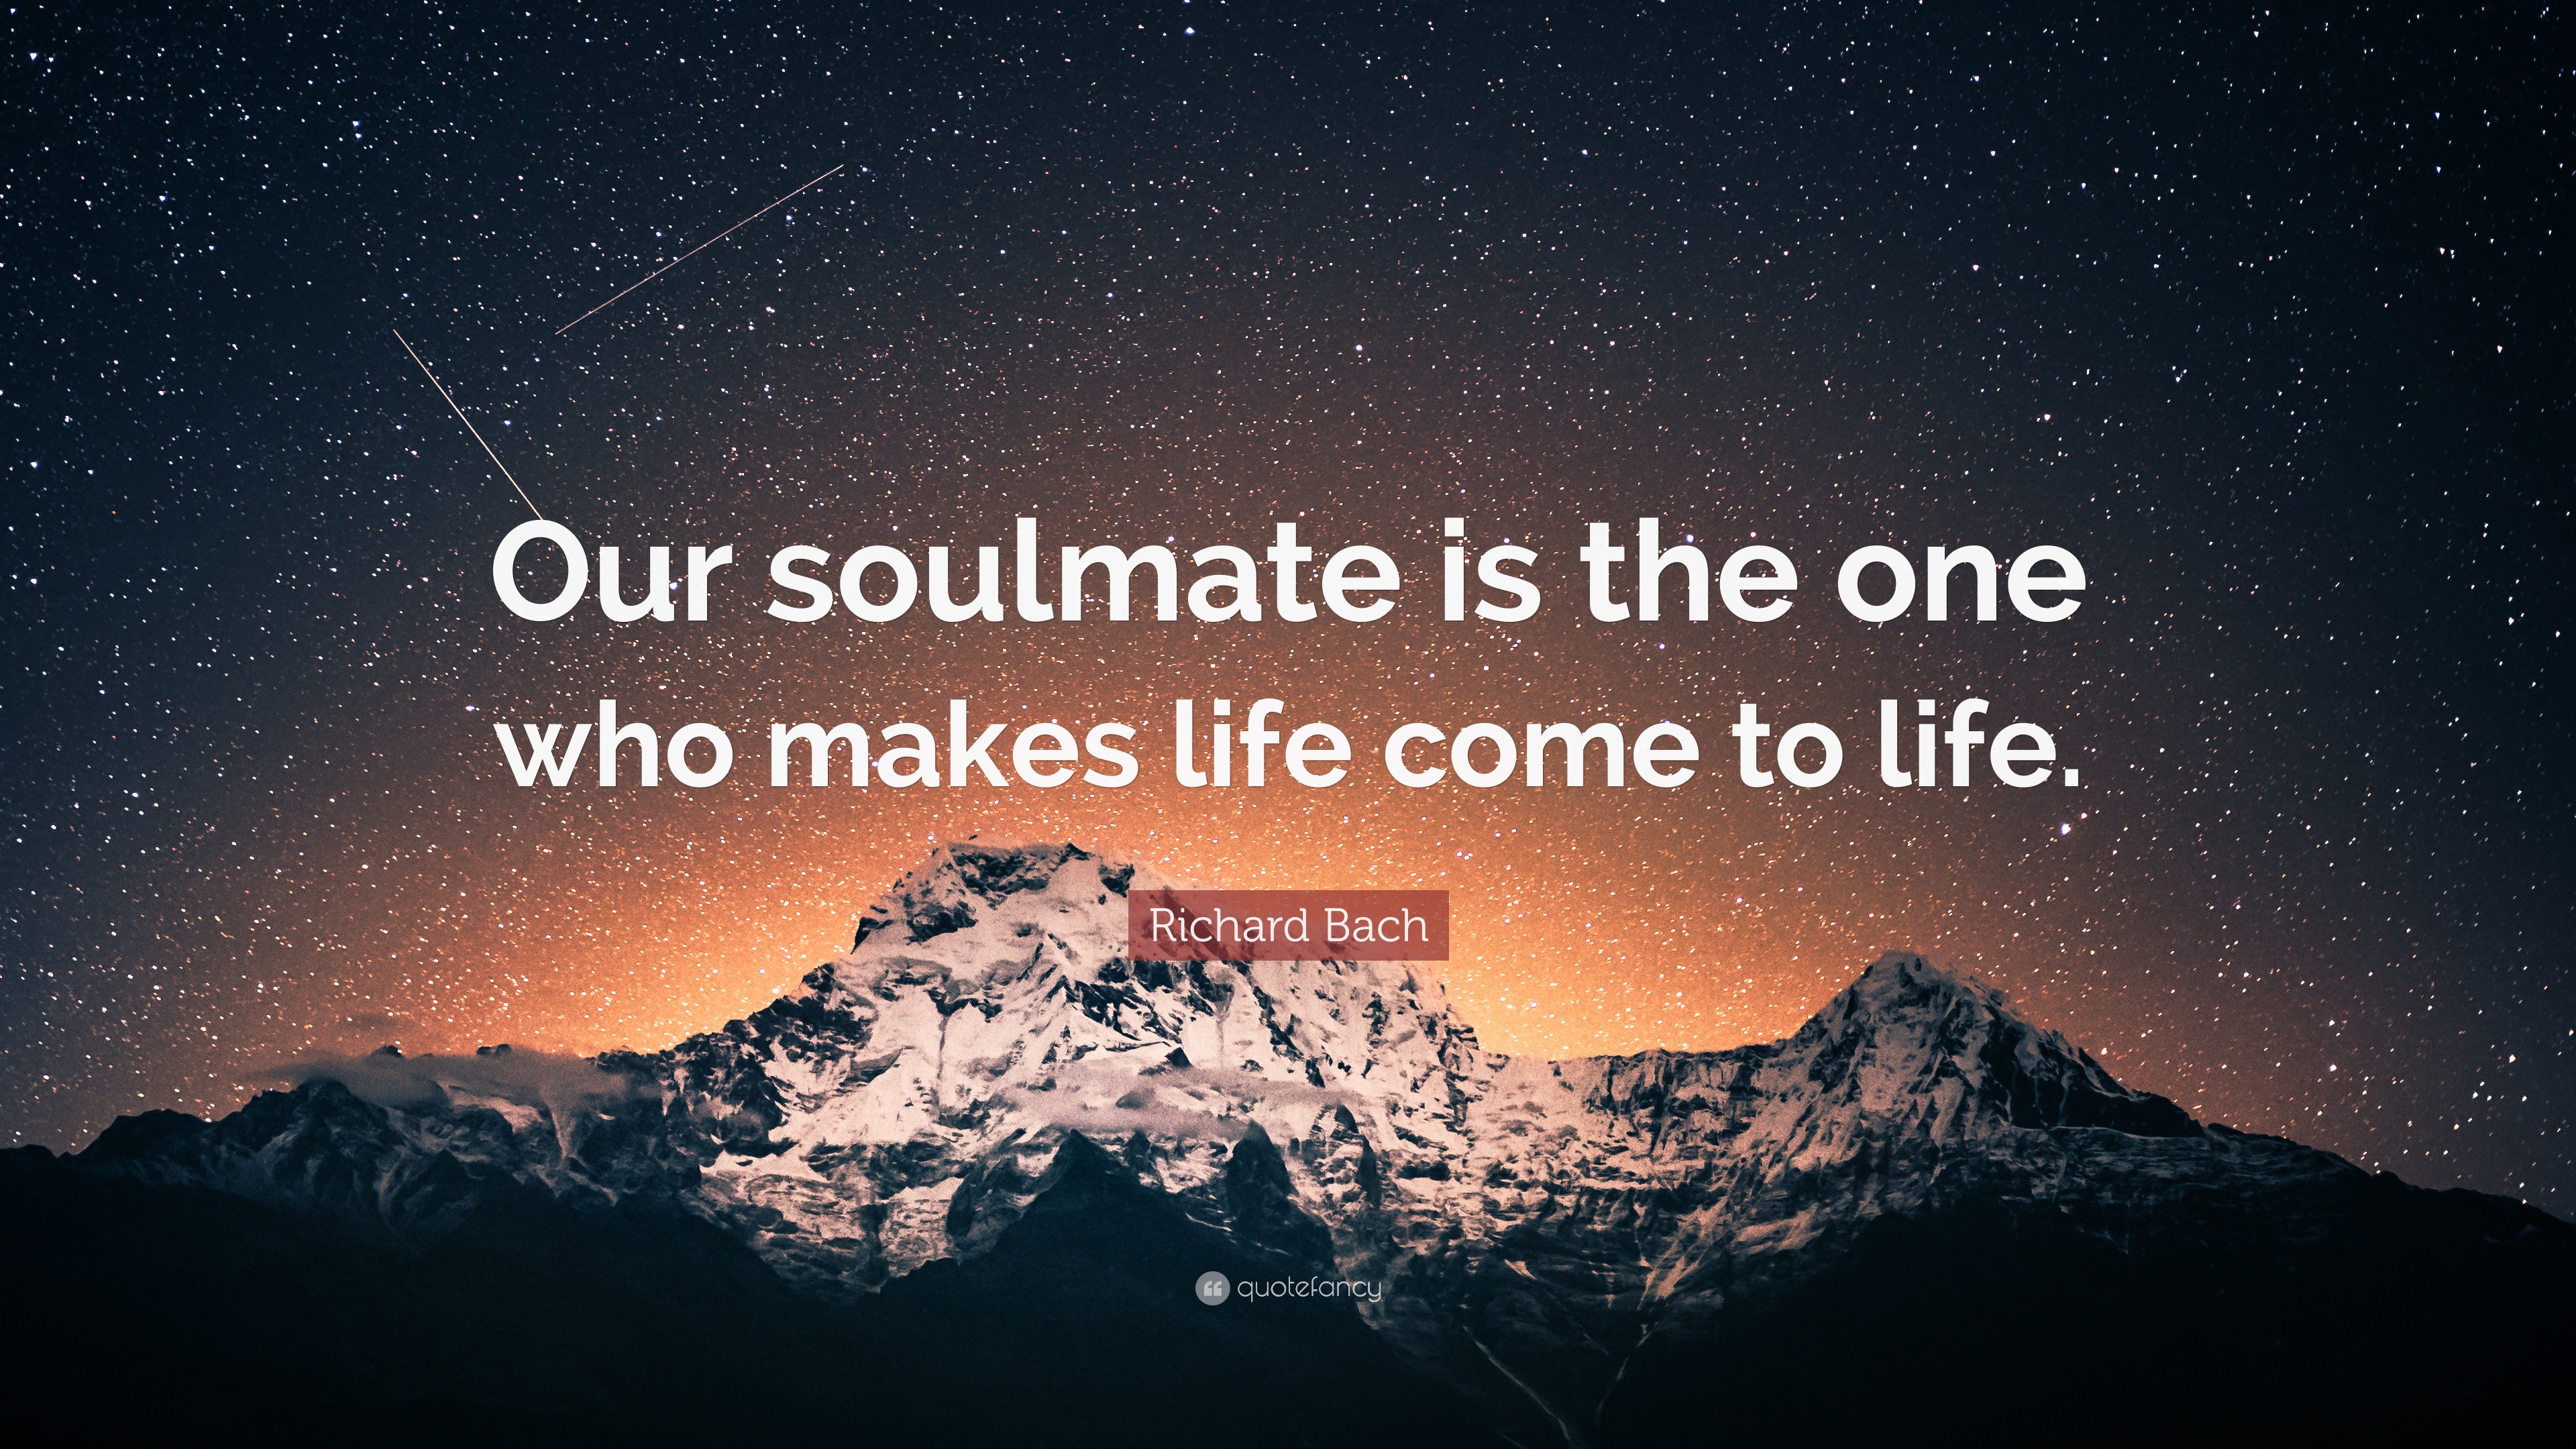 Richard Bach Quote “Our soulmate is the one who makes life come to life.”